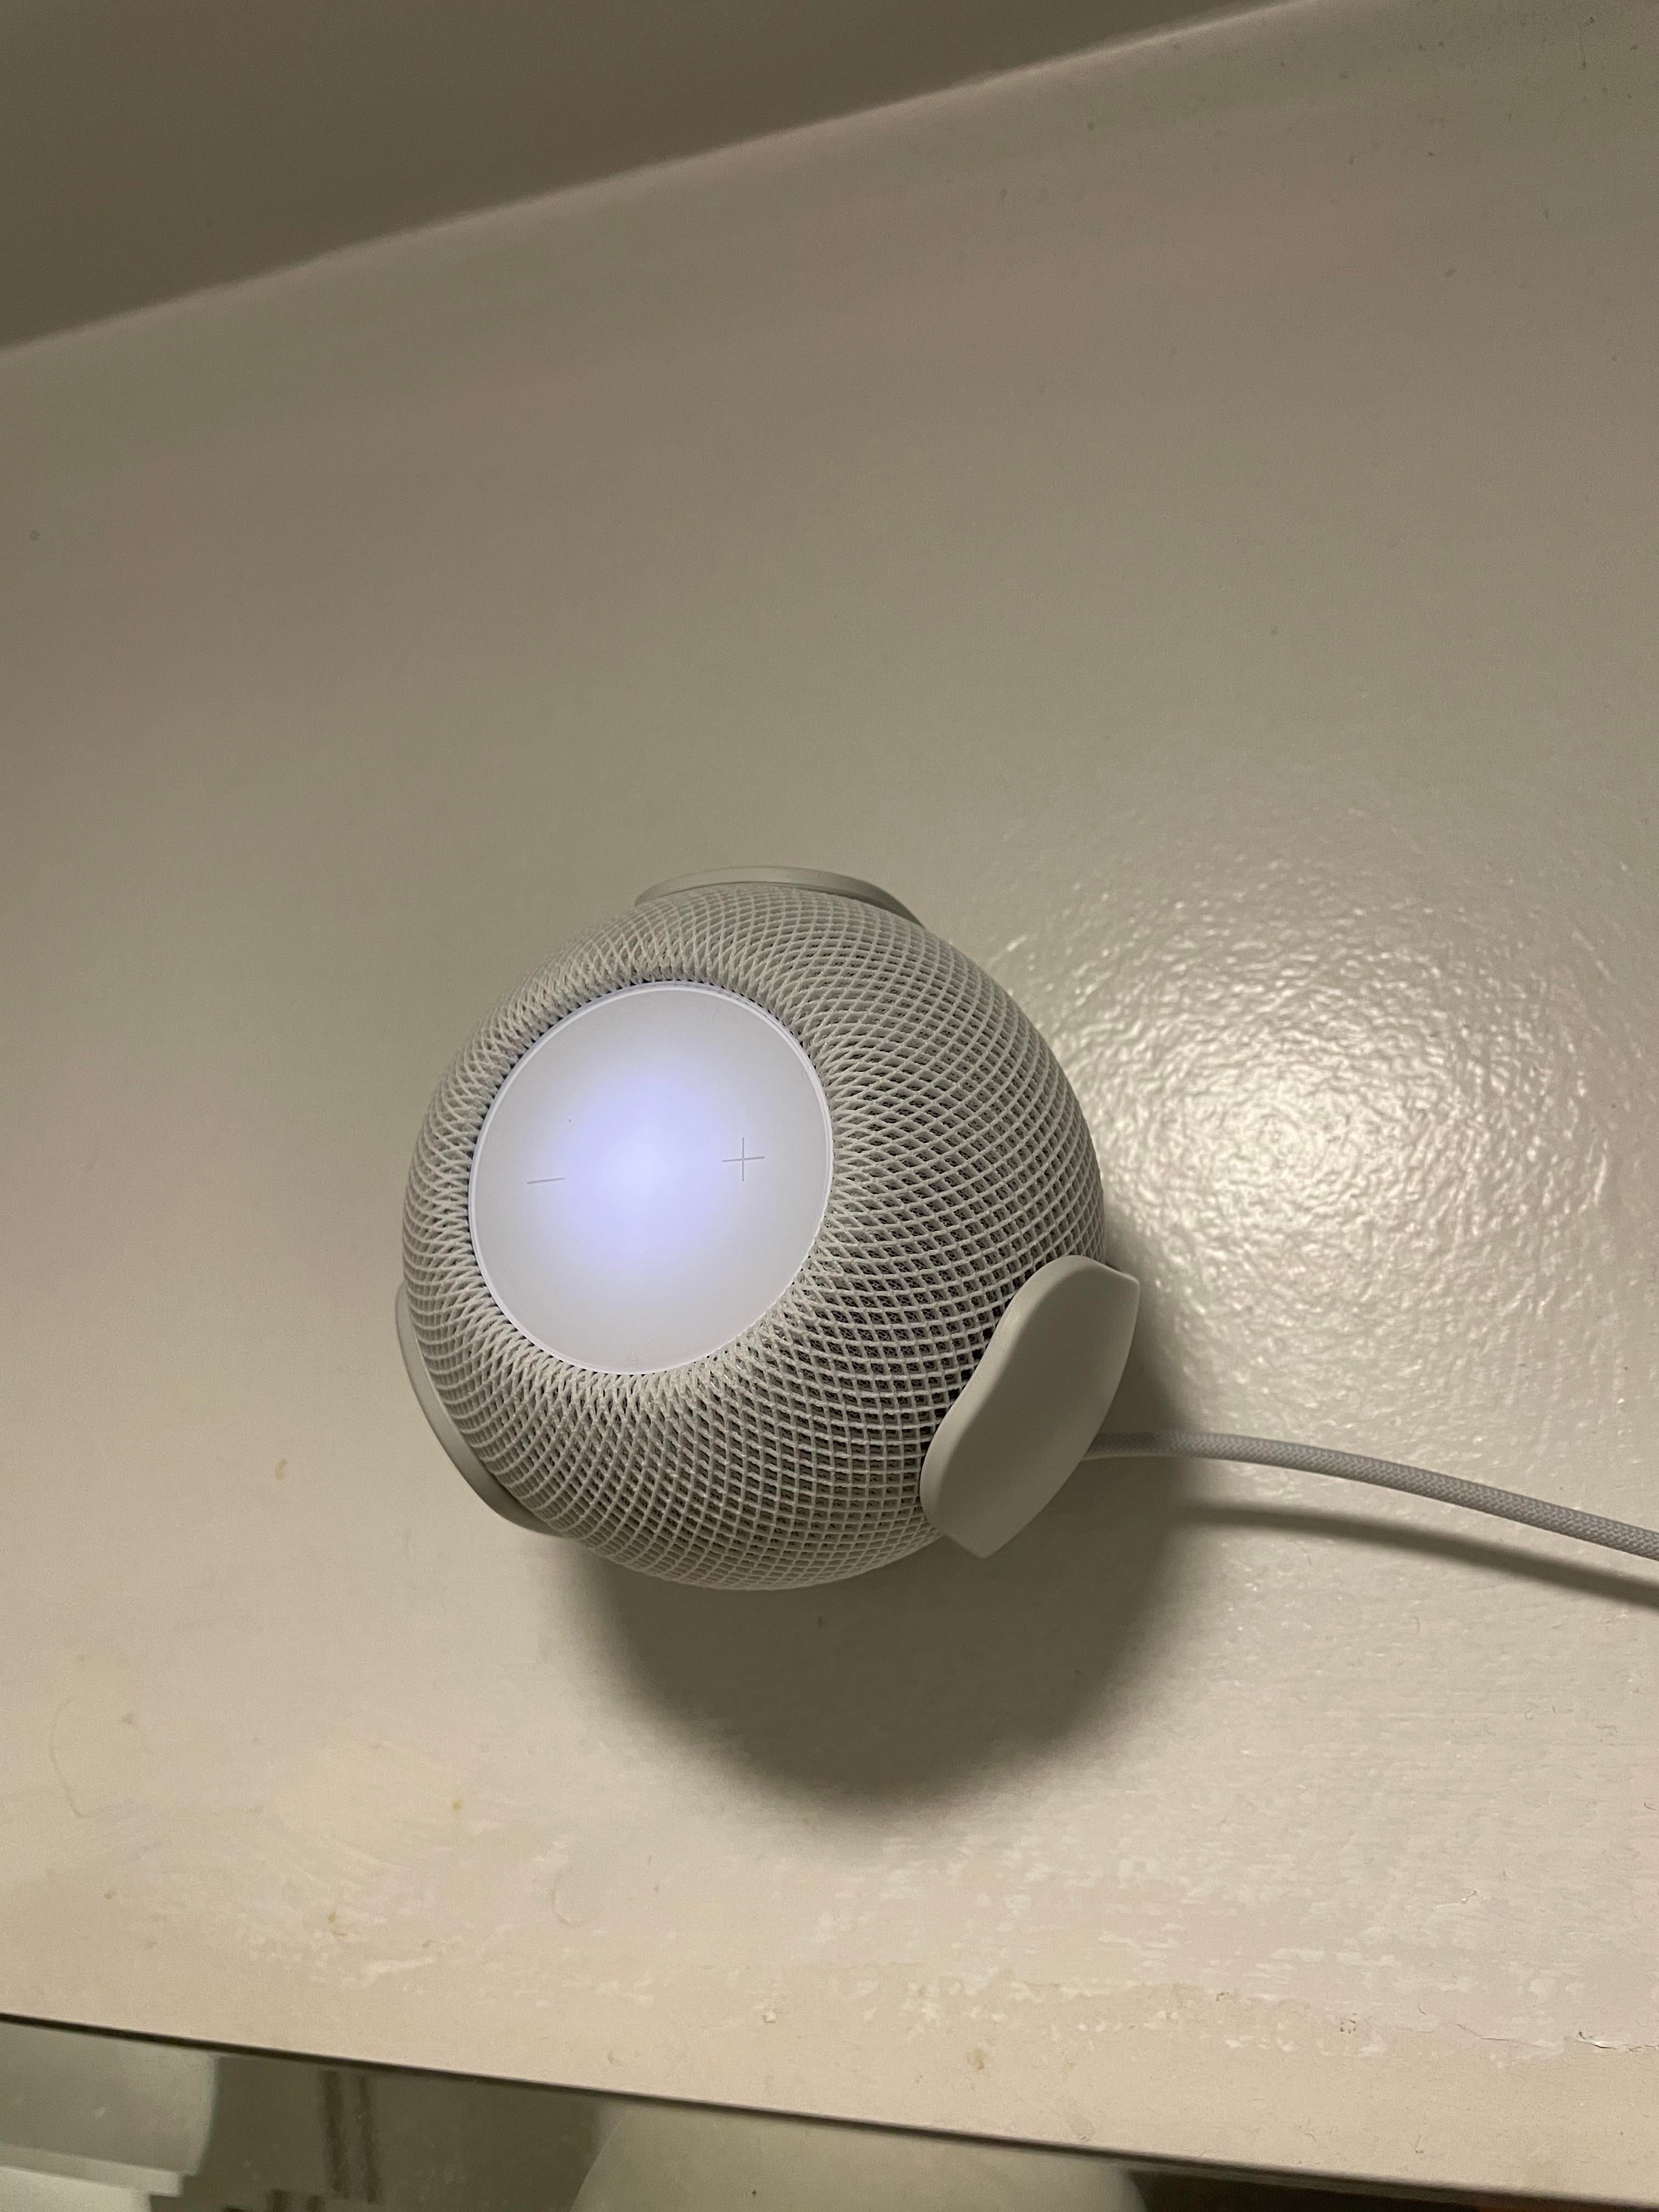 X post from r homepod for anyone looking for a